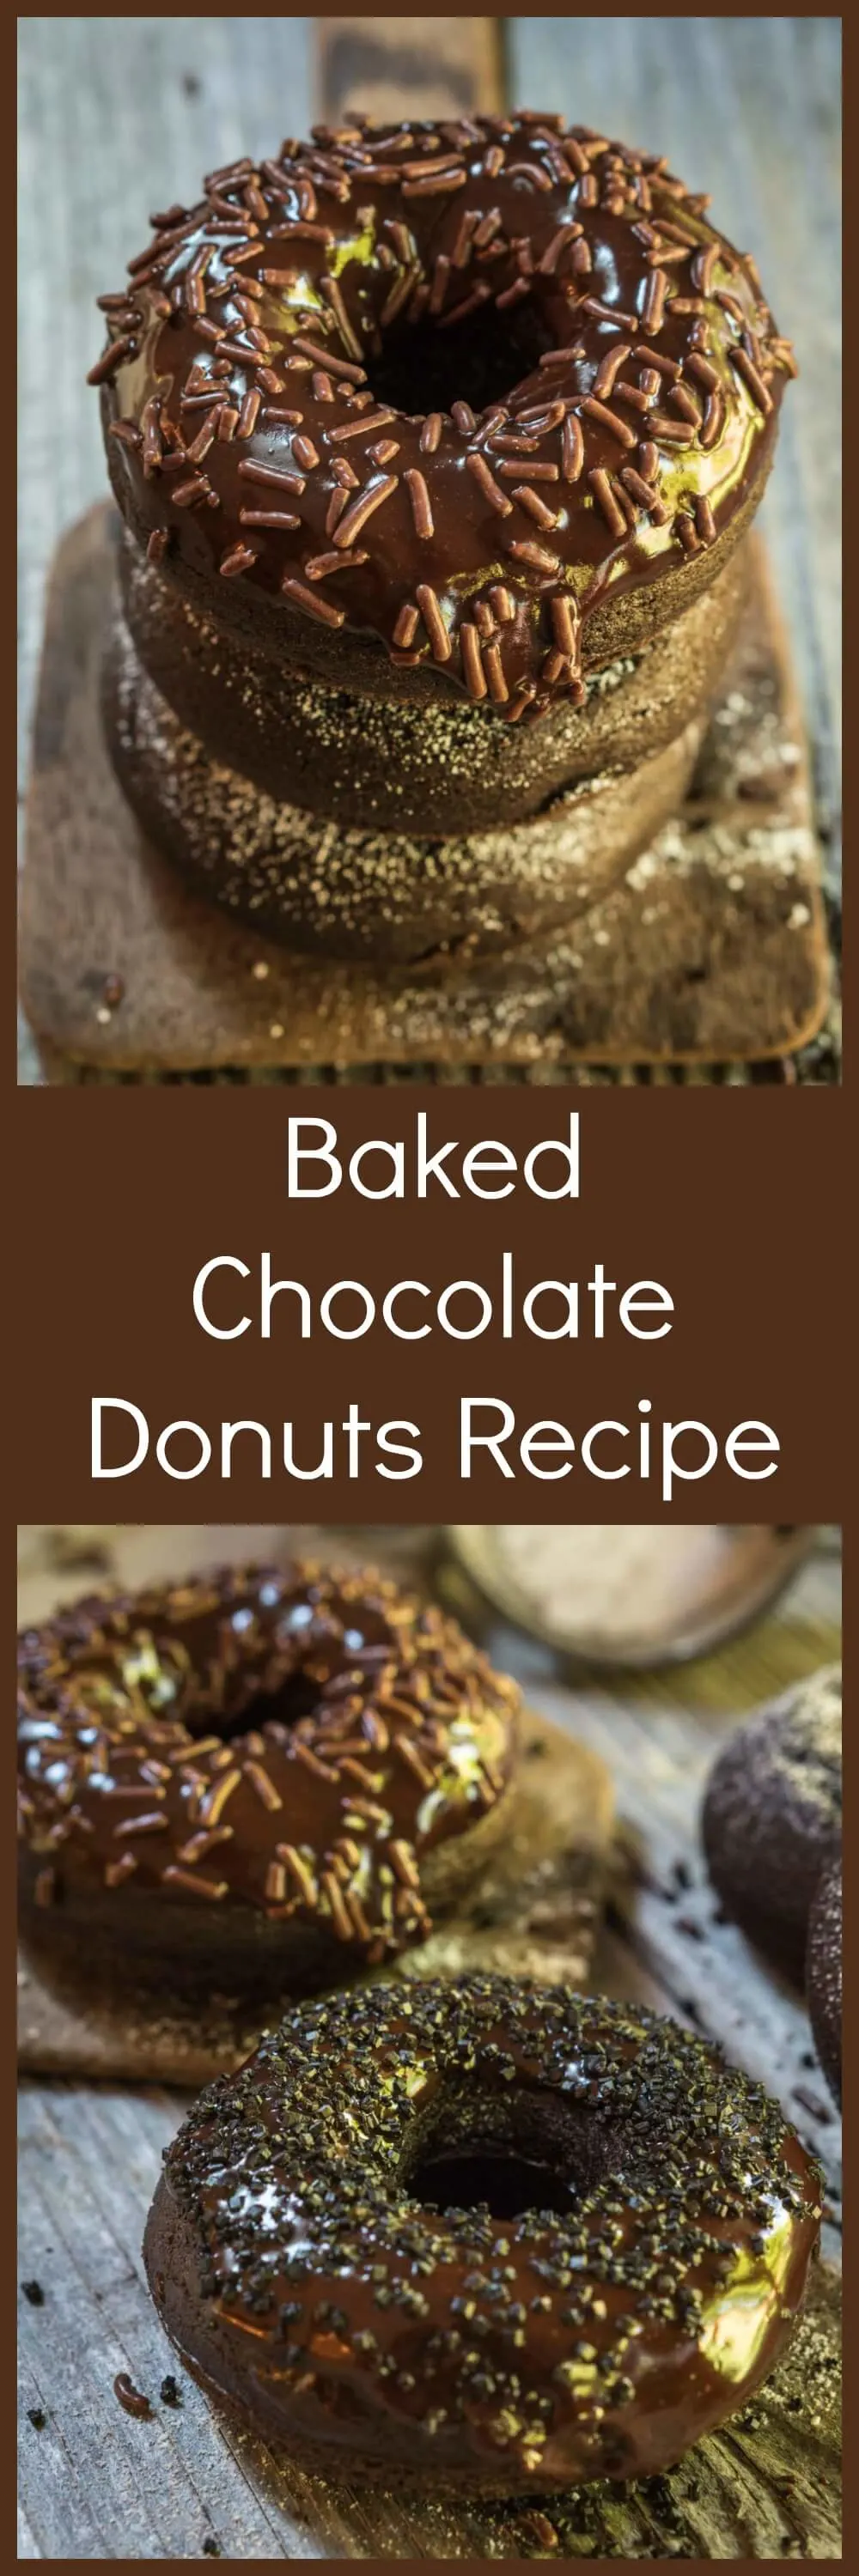 A two photo collage for Pinterest. The top photo is a stack of baked donuts with the top one glazed and topped with chocolate sprinkles. The bottom photo is three donuts glazed with chocolate and sprinkled with chocolate sprinkles. The title \"Baked Chocolate Donuts Recipe\" runs through the center.